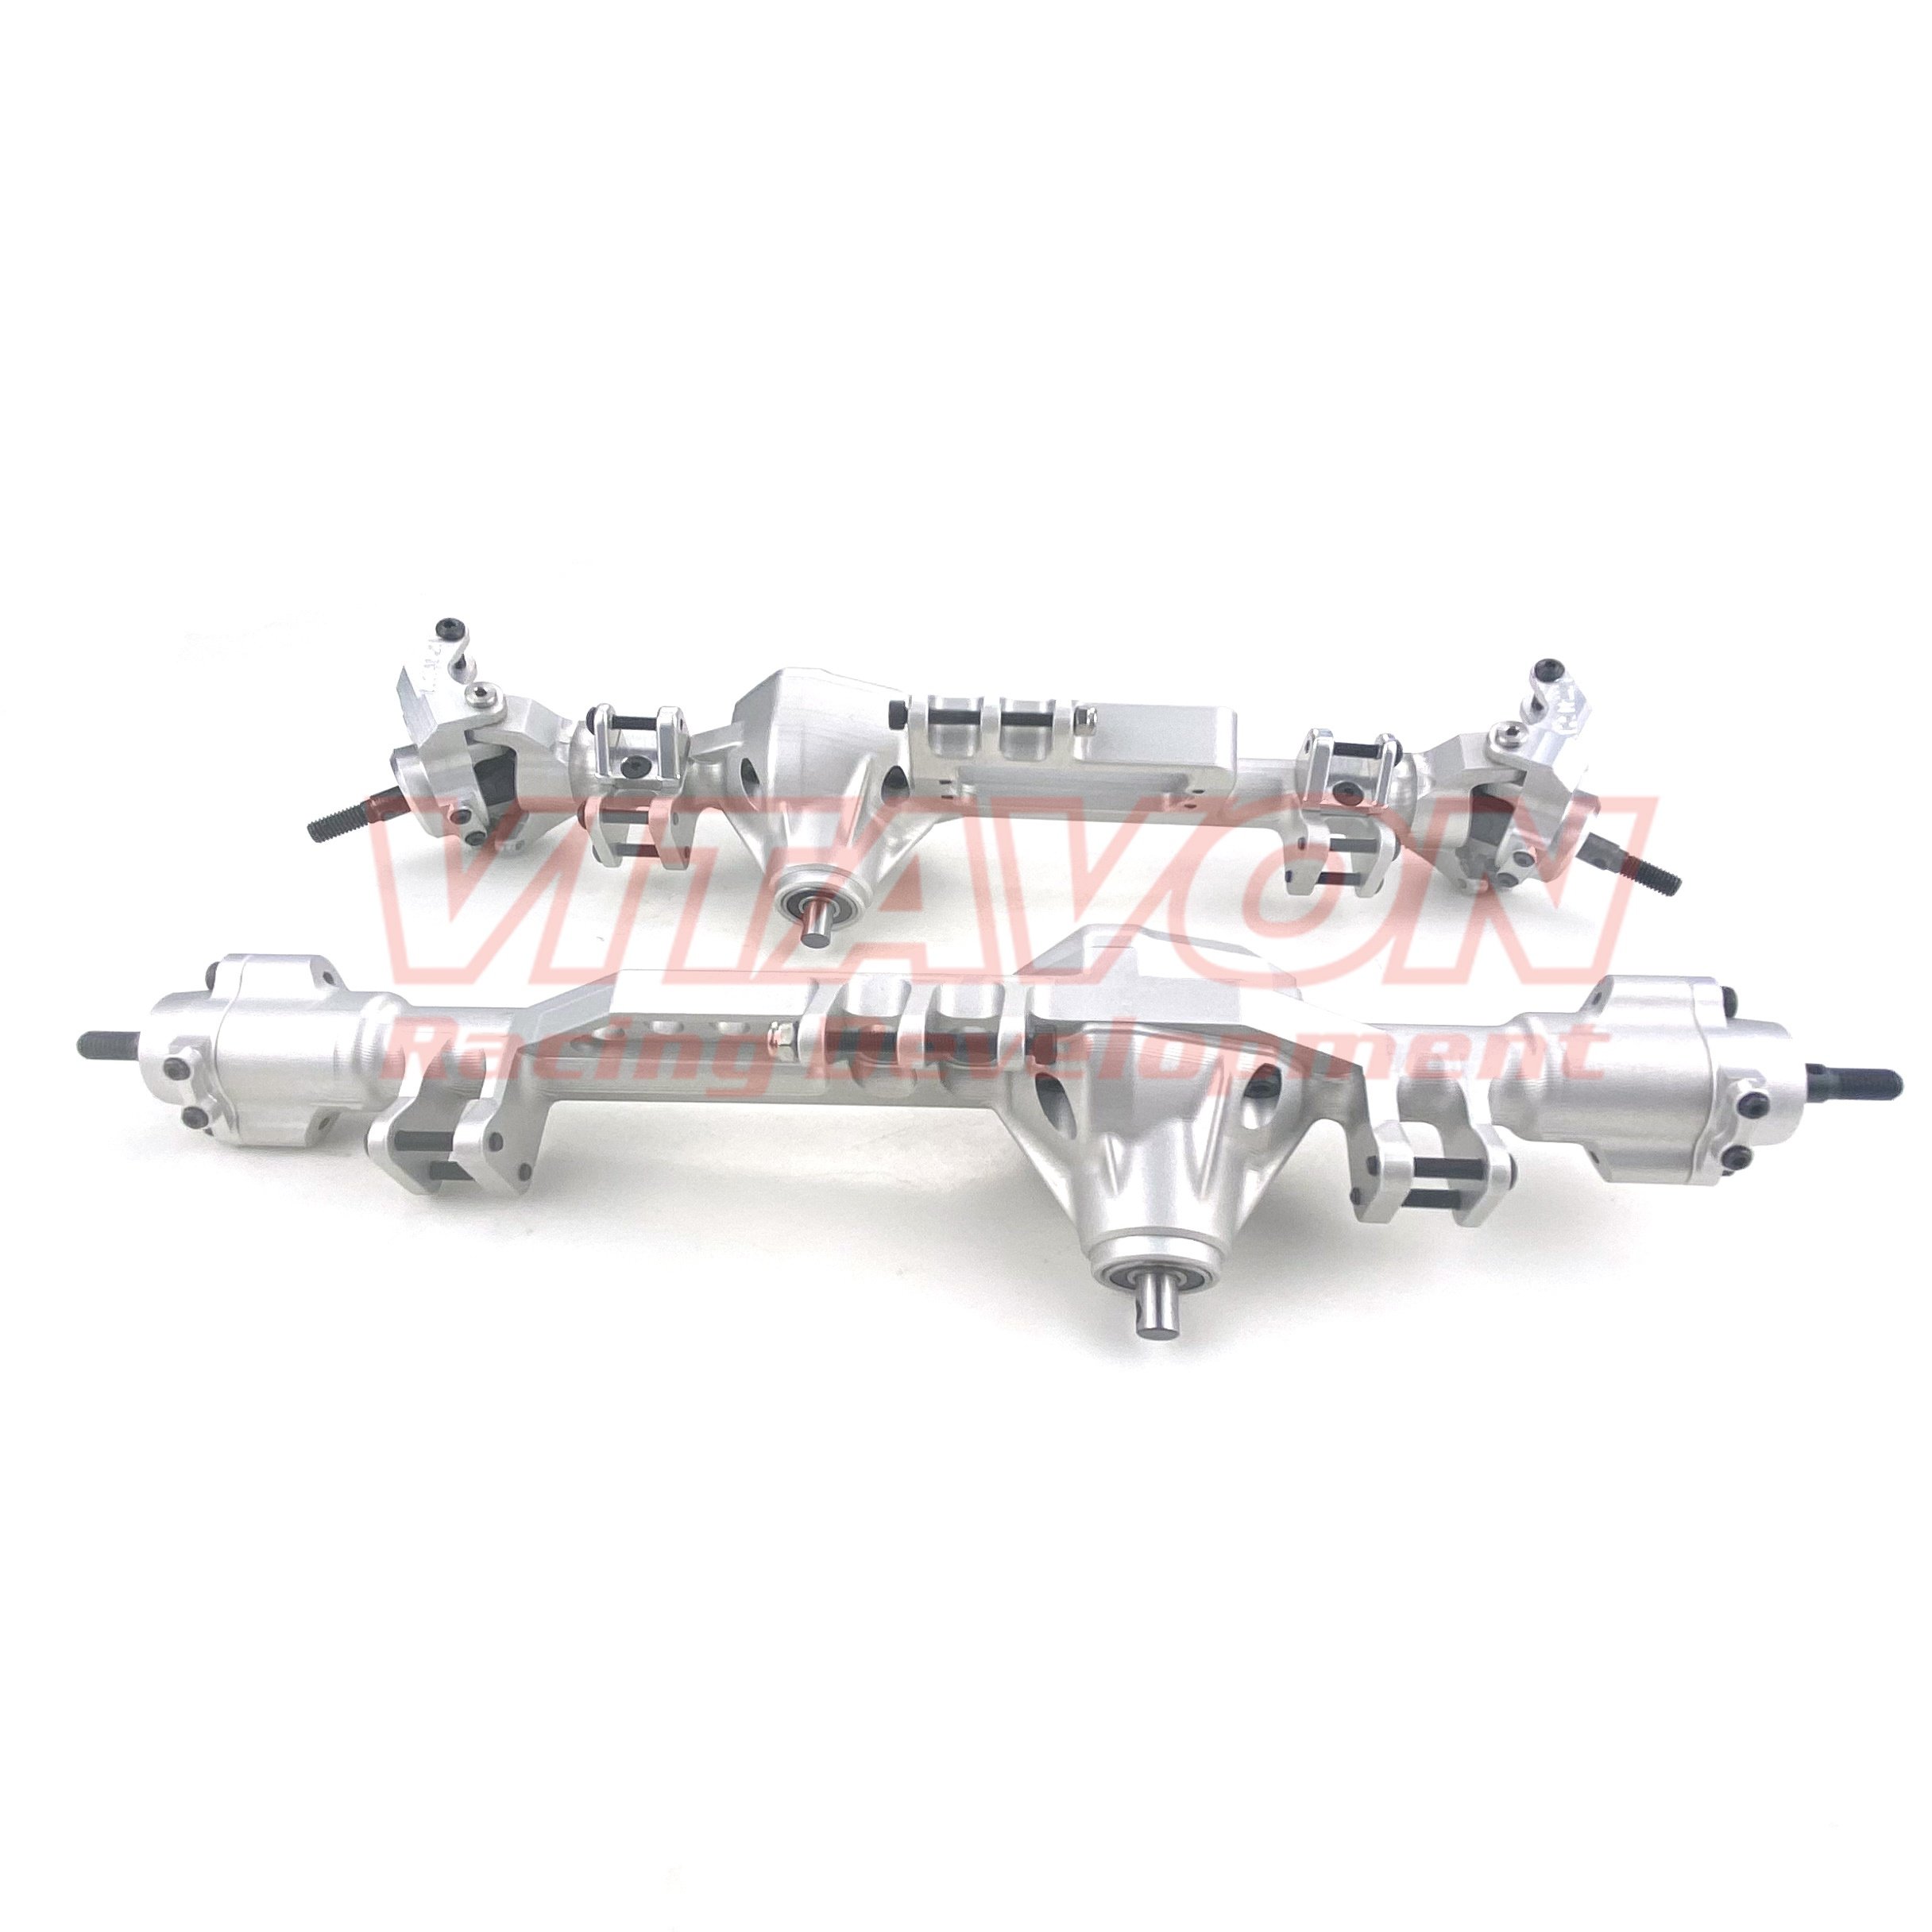 VITAVON RYFT Full Axle kit with Interals Front & Rear for Axial RBX10 Ryft 4WD Bouncer 1/10